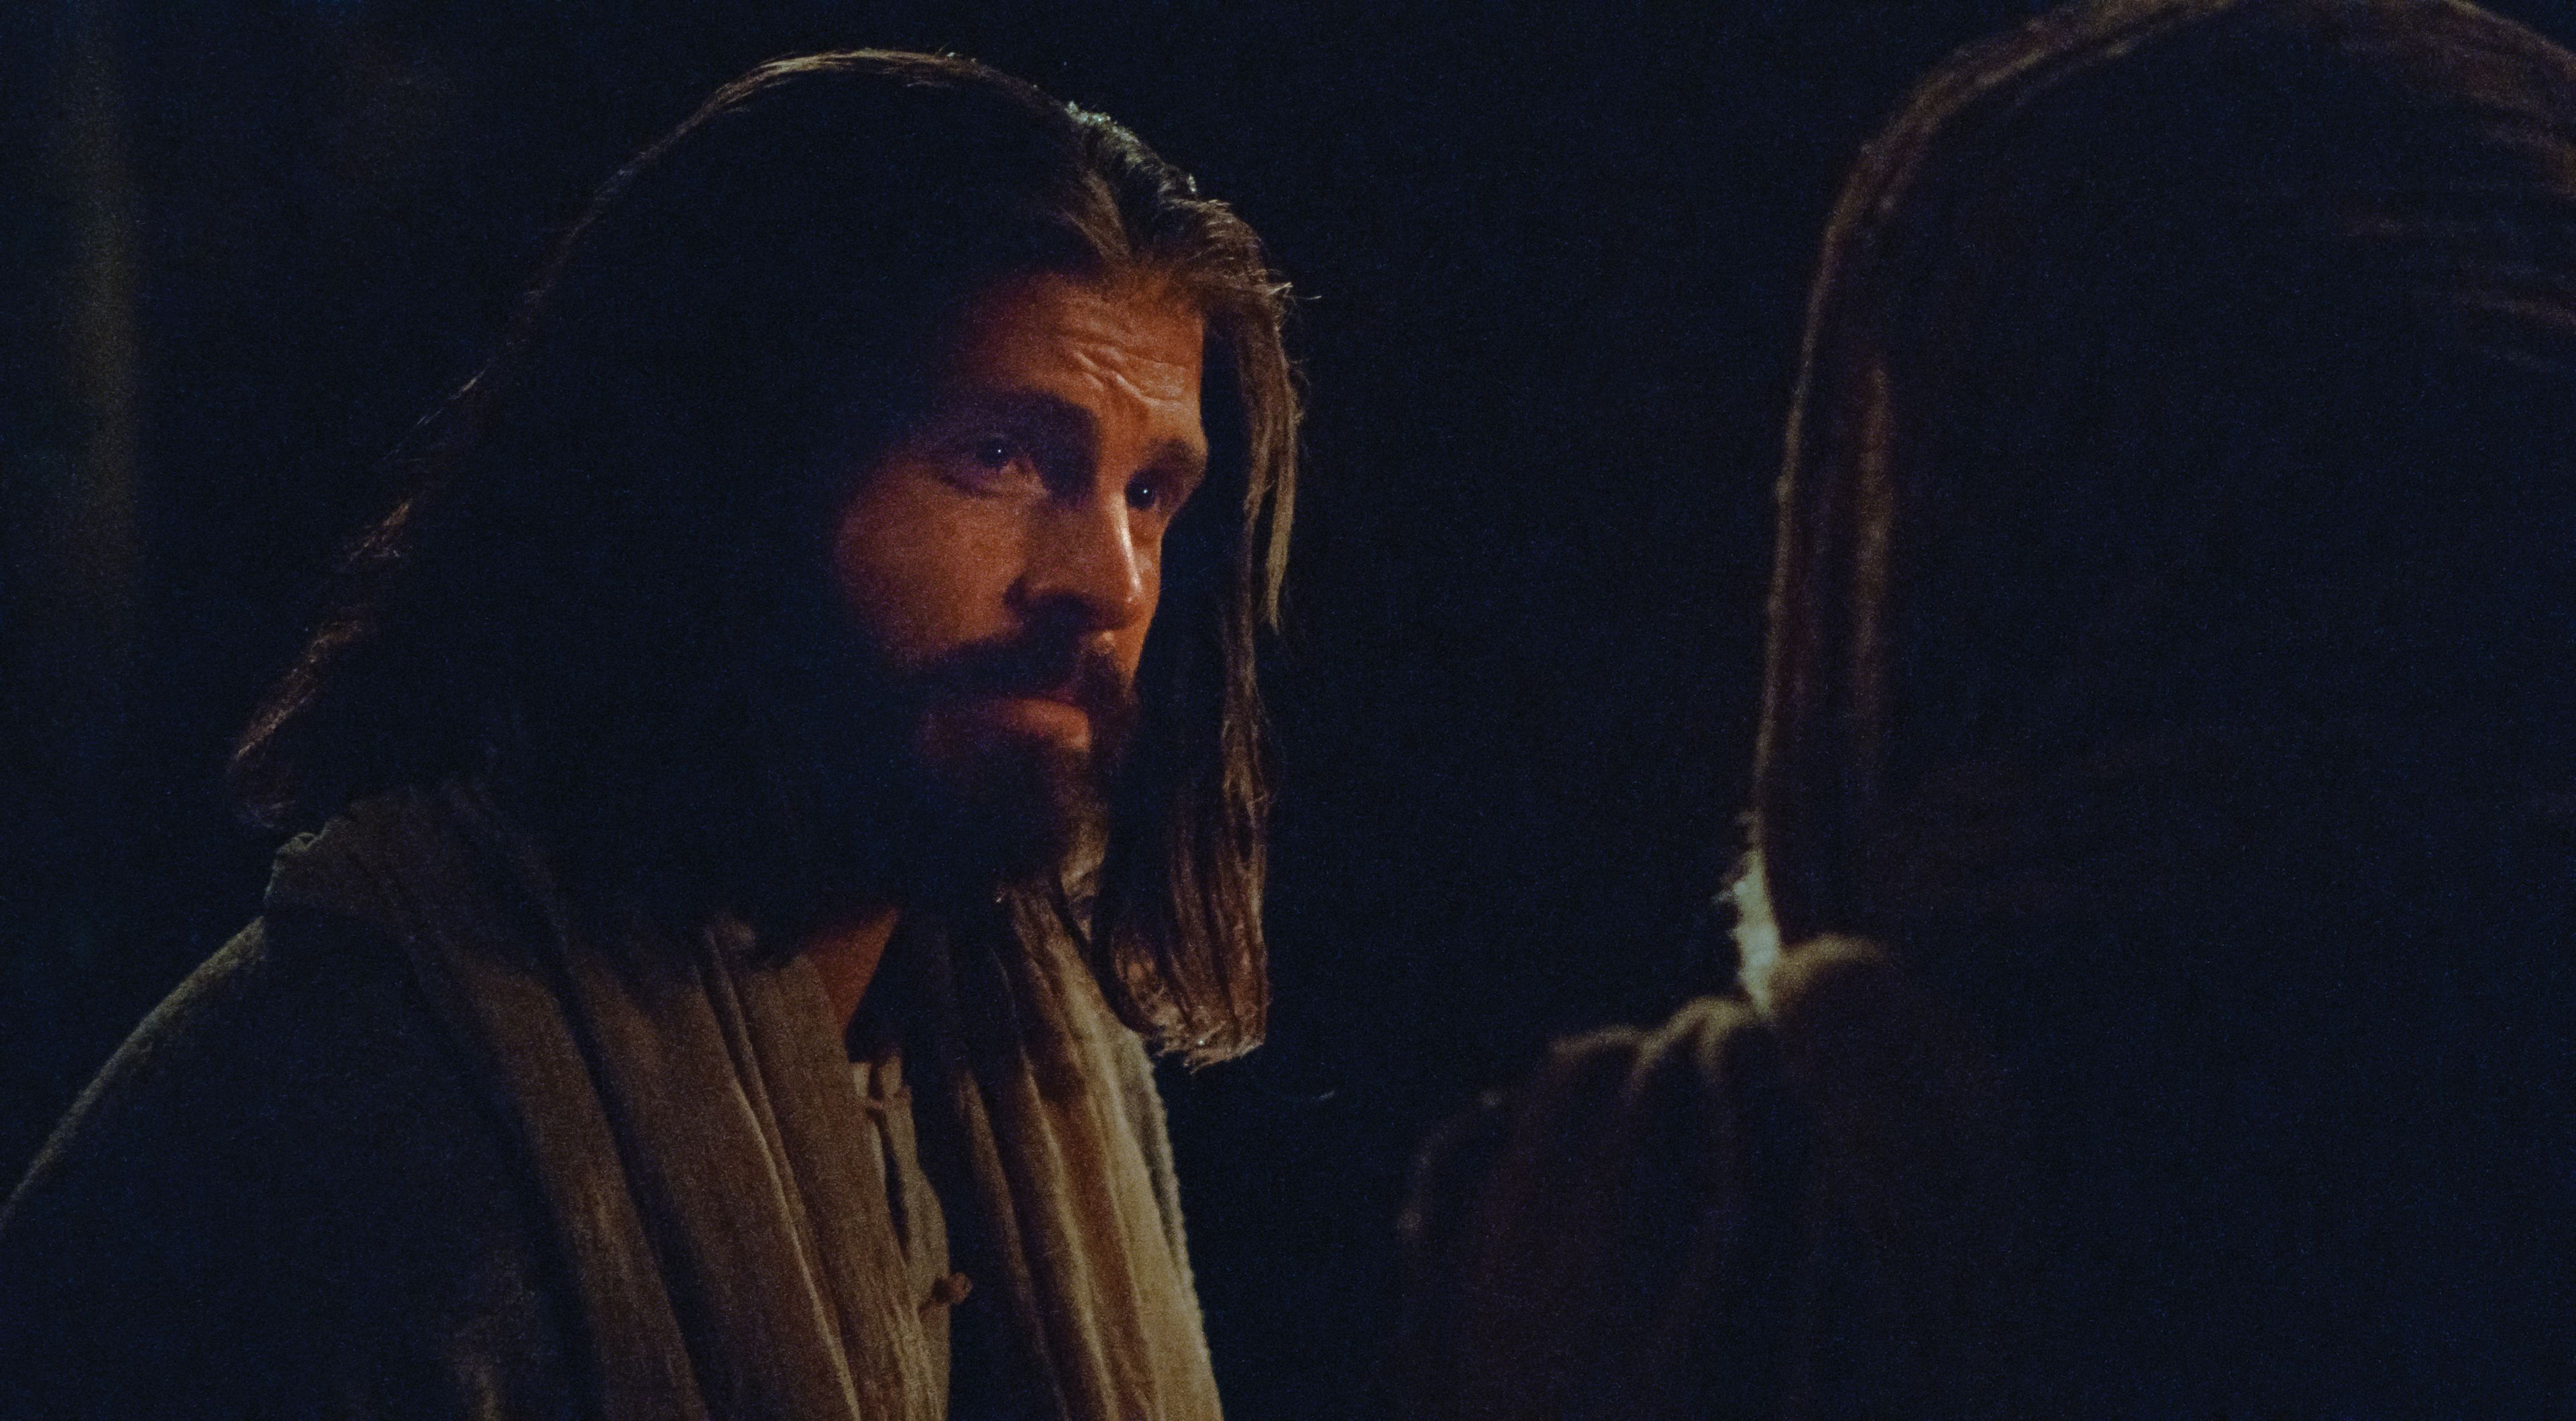 Jesus teaches Nicodemus that man must be born again or he cannot enter the kingdom of God.